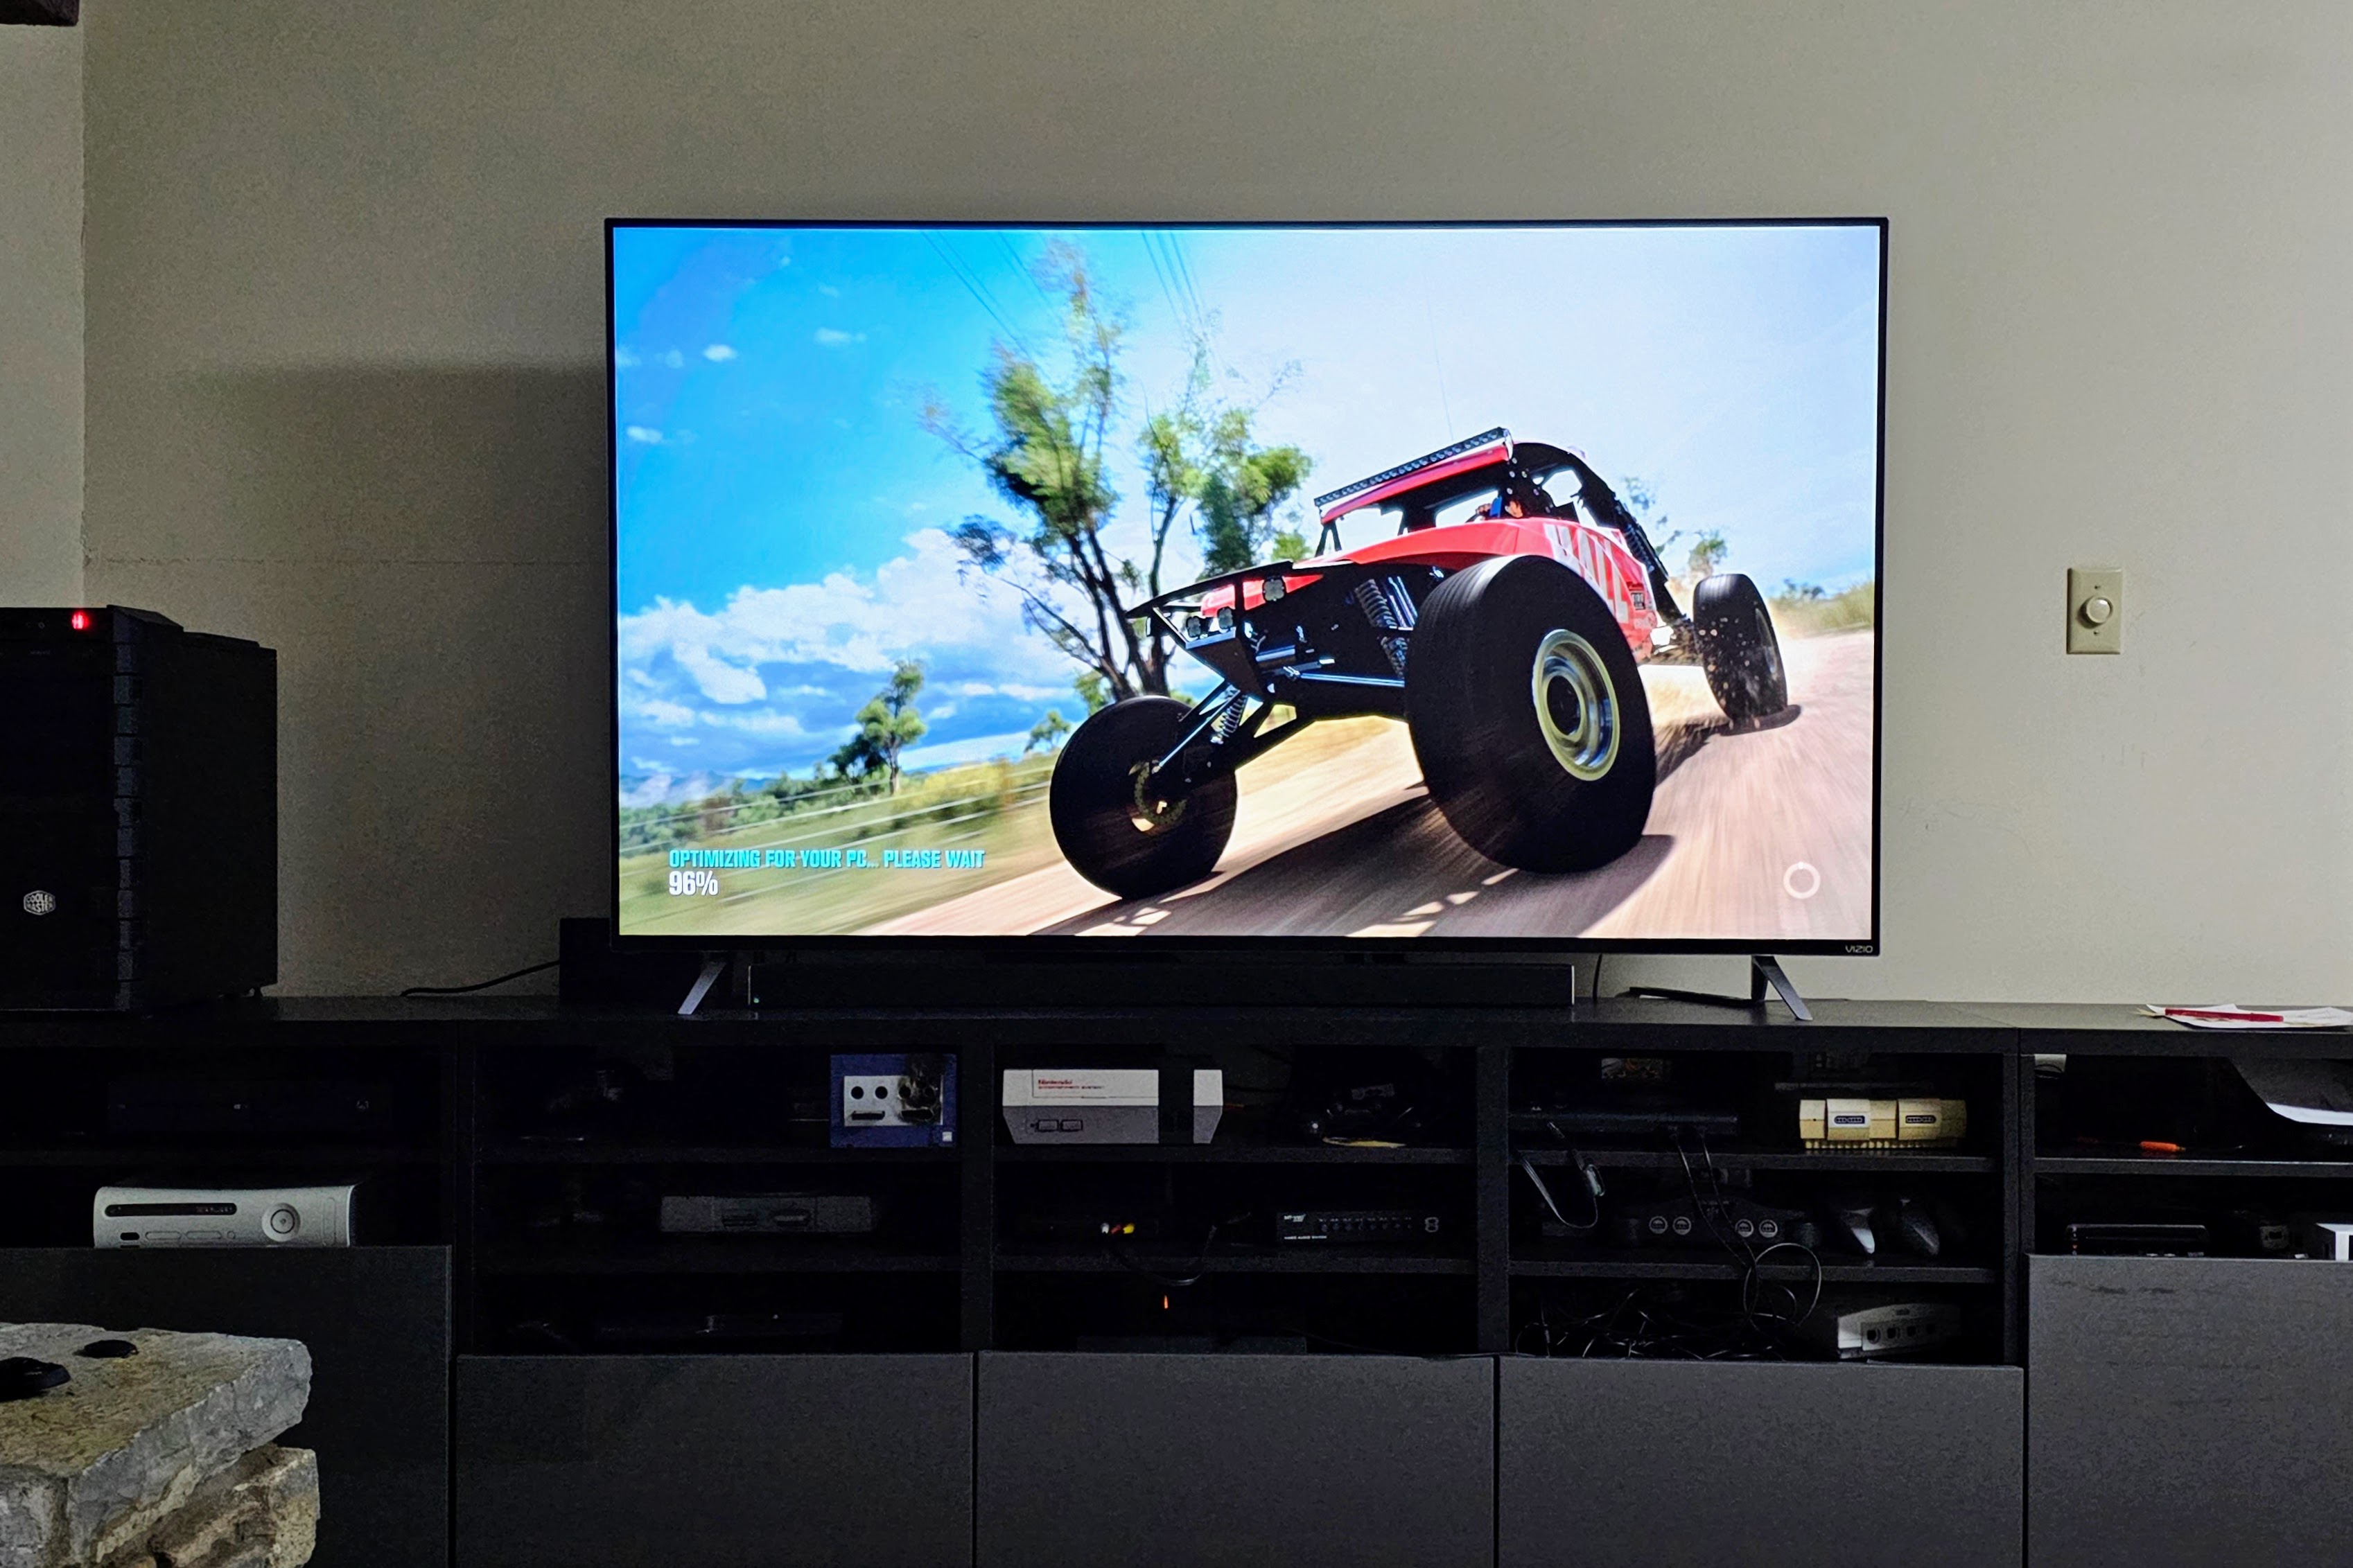 70-inch TV playing Forza Horizon 3 off a desktop tower PC in an entertainment console.